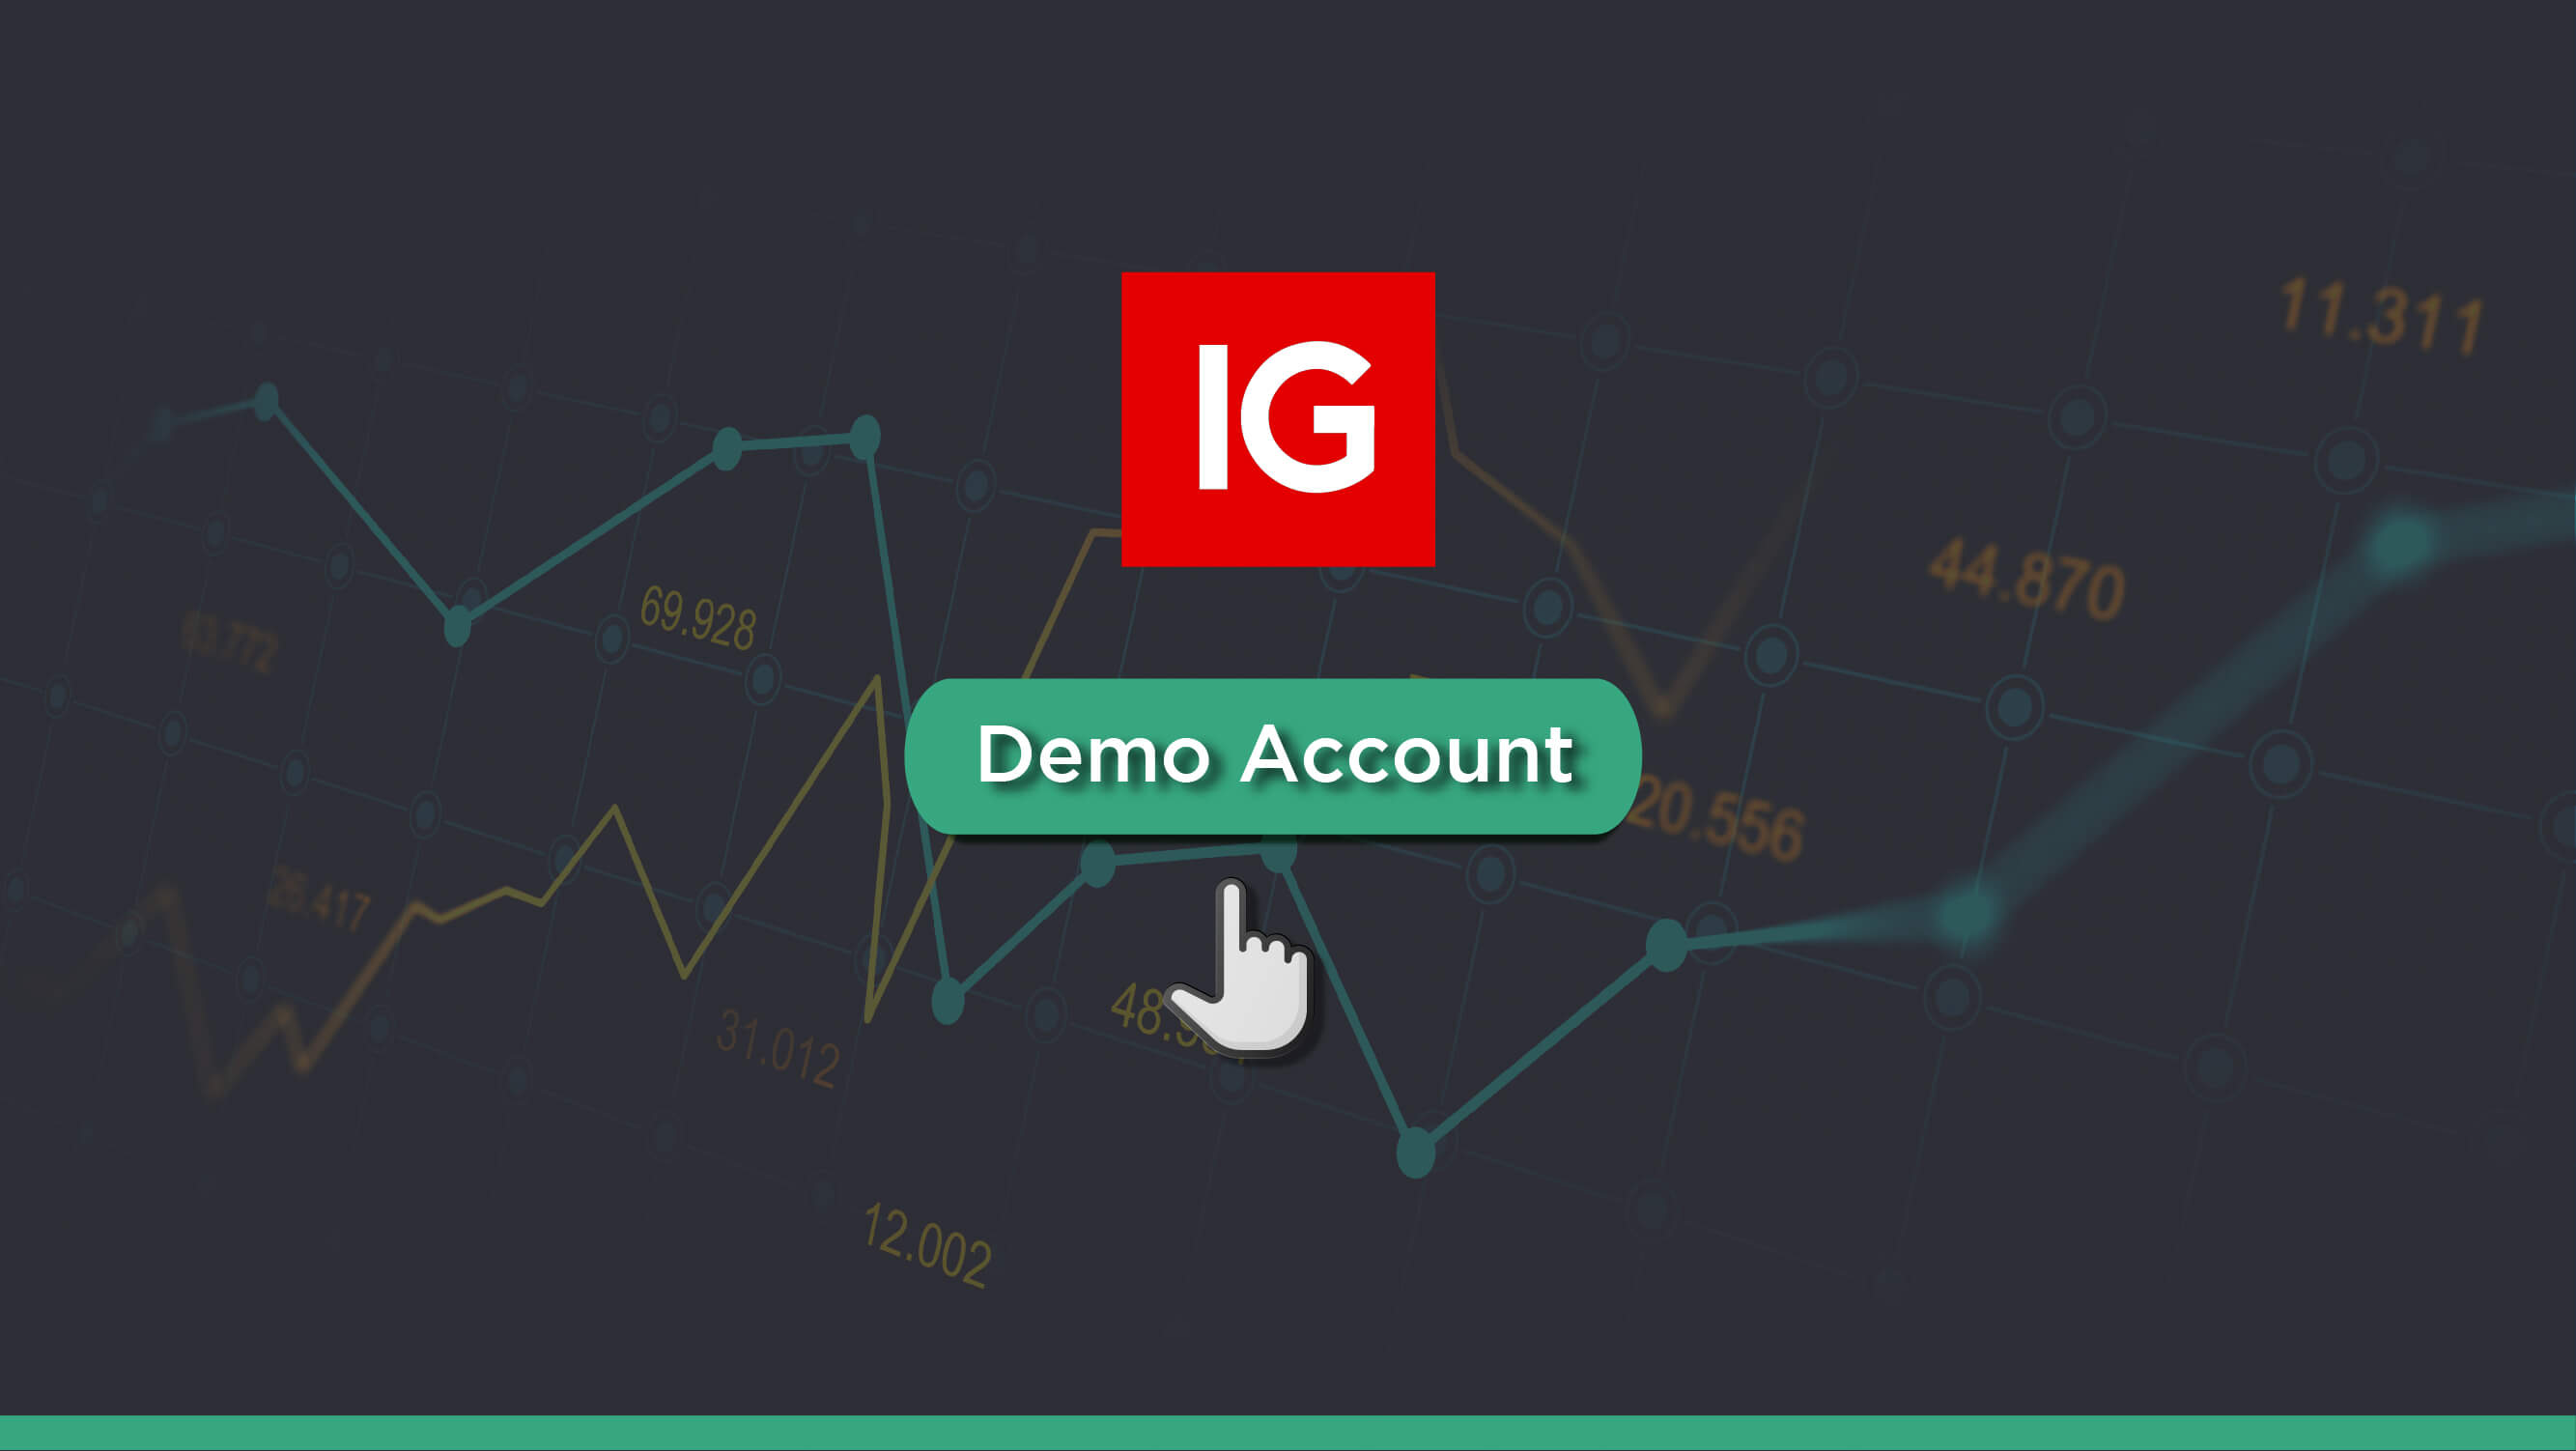 Getting Started with IG Demo Account